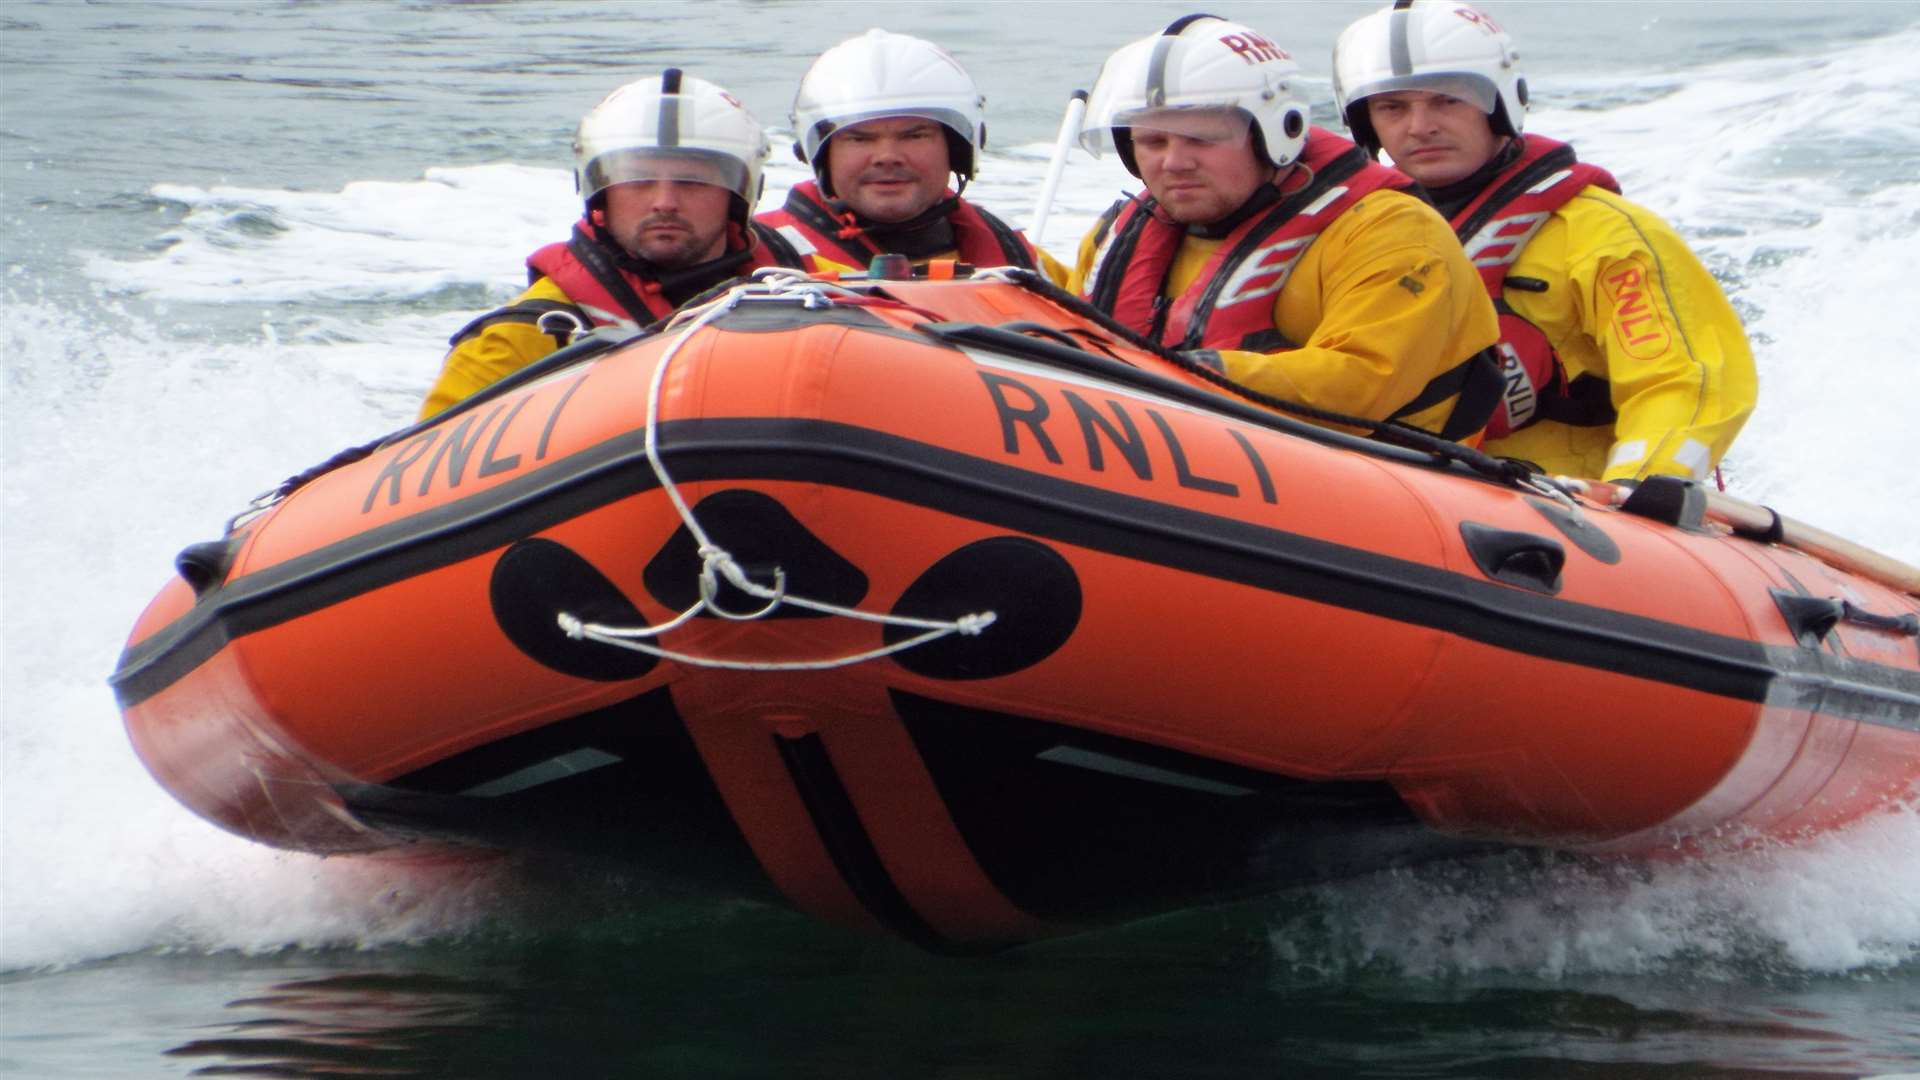 The RNLI crew aboard Buster